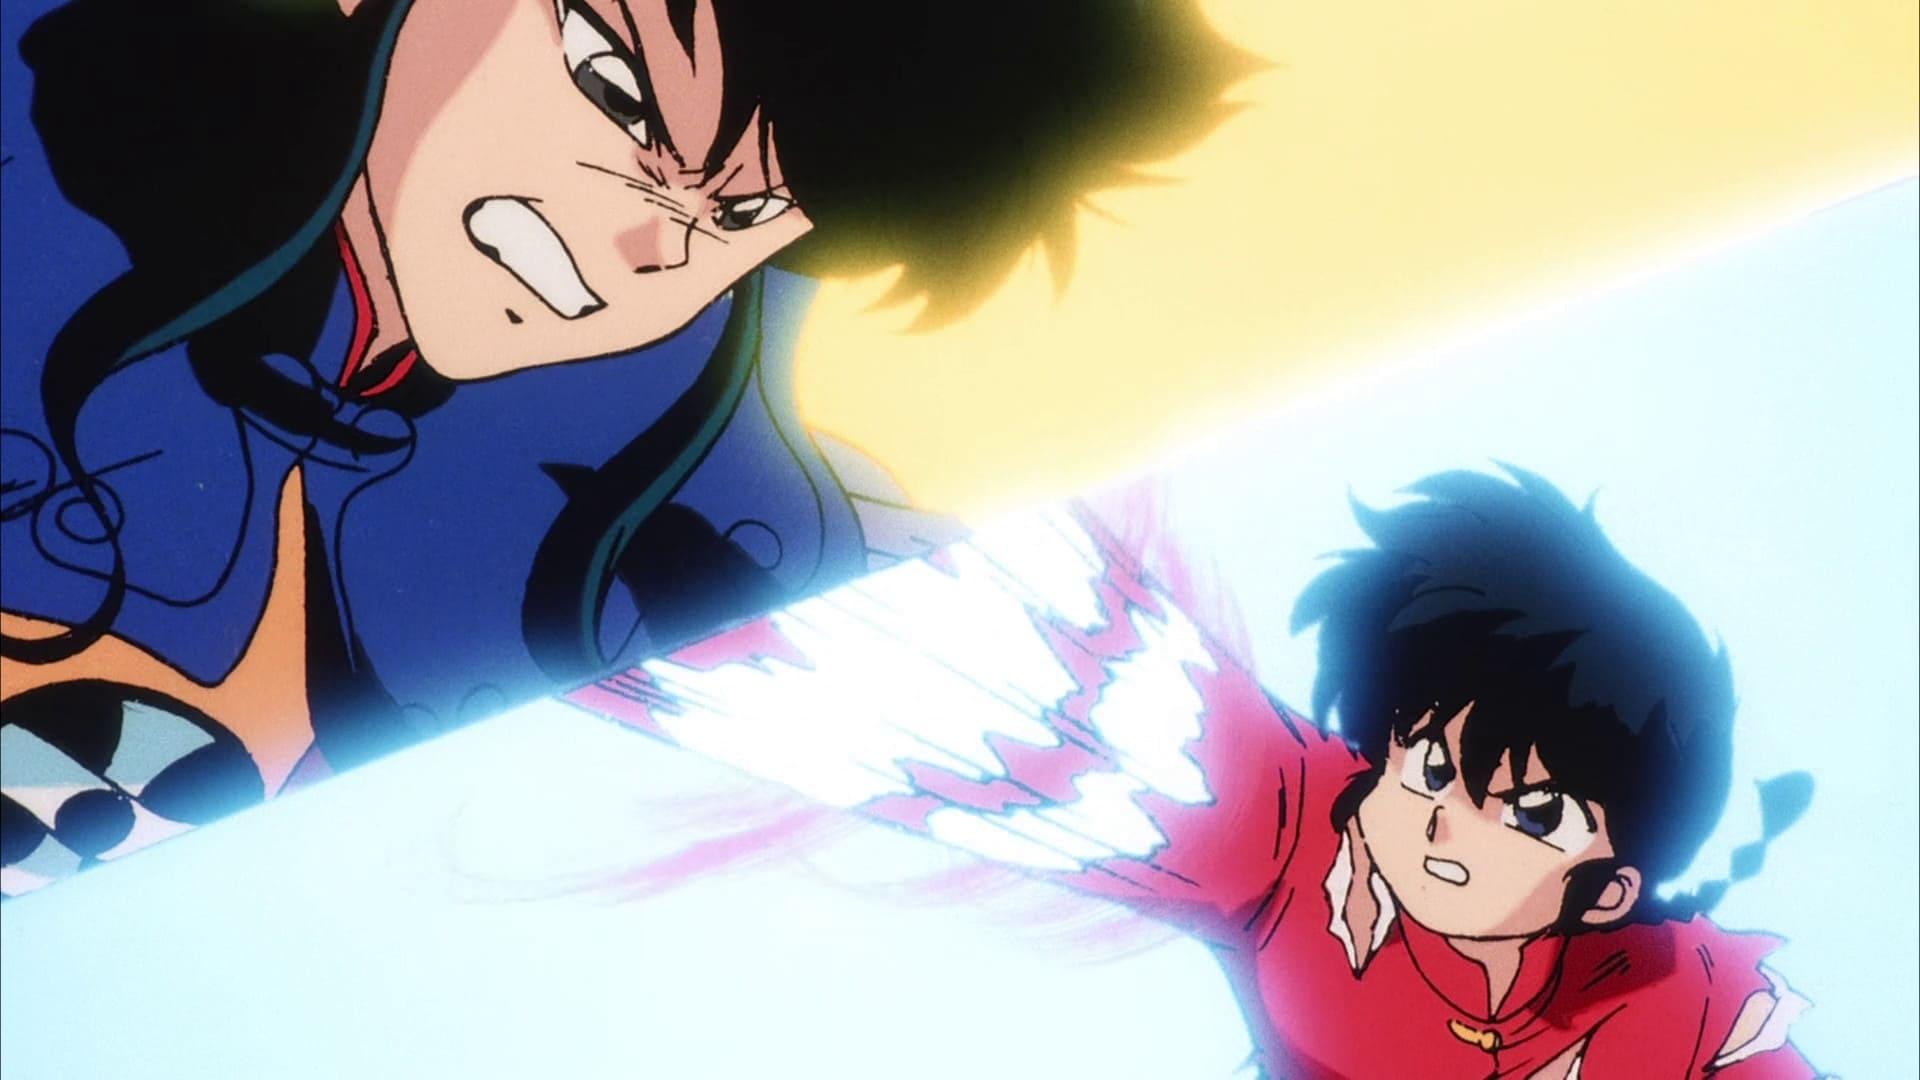 Ranma ½: The Movie — The Battle of Nekonron: The Fight to Break the Rules! backdrop